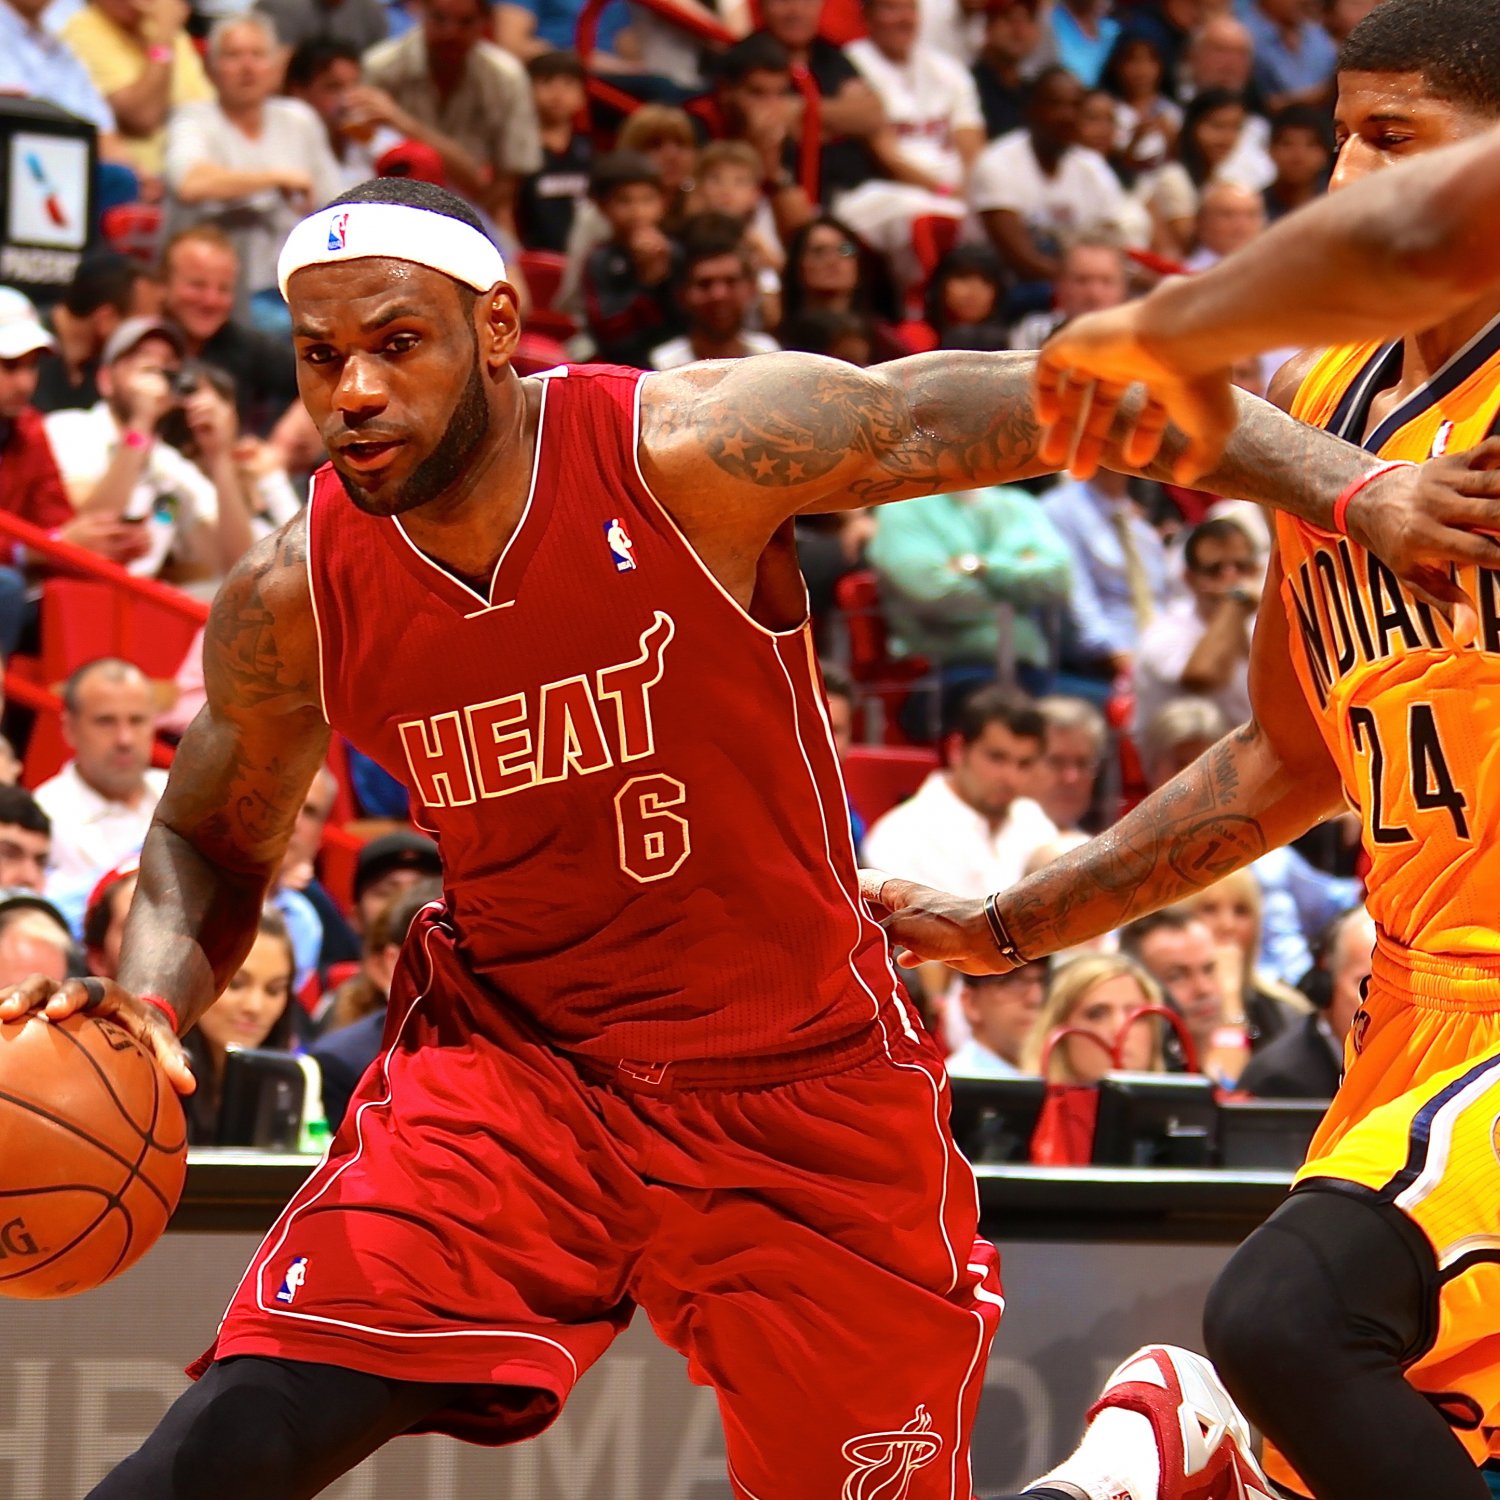 Pacers vs. Heat: Live Score, Highlights and Reaction | Bleacher Report